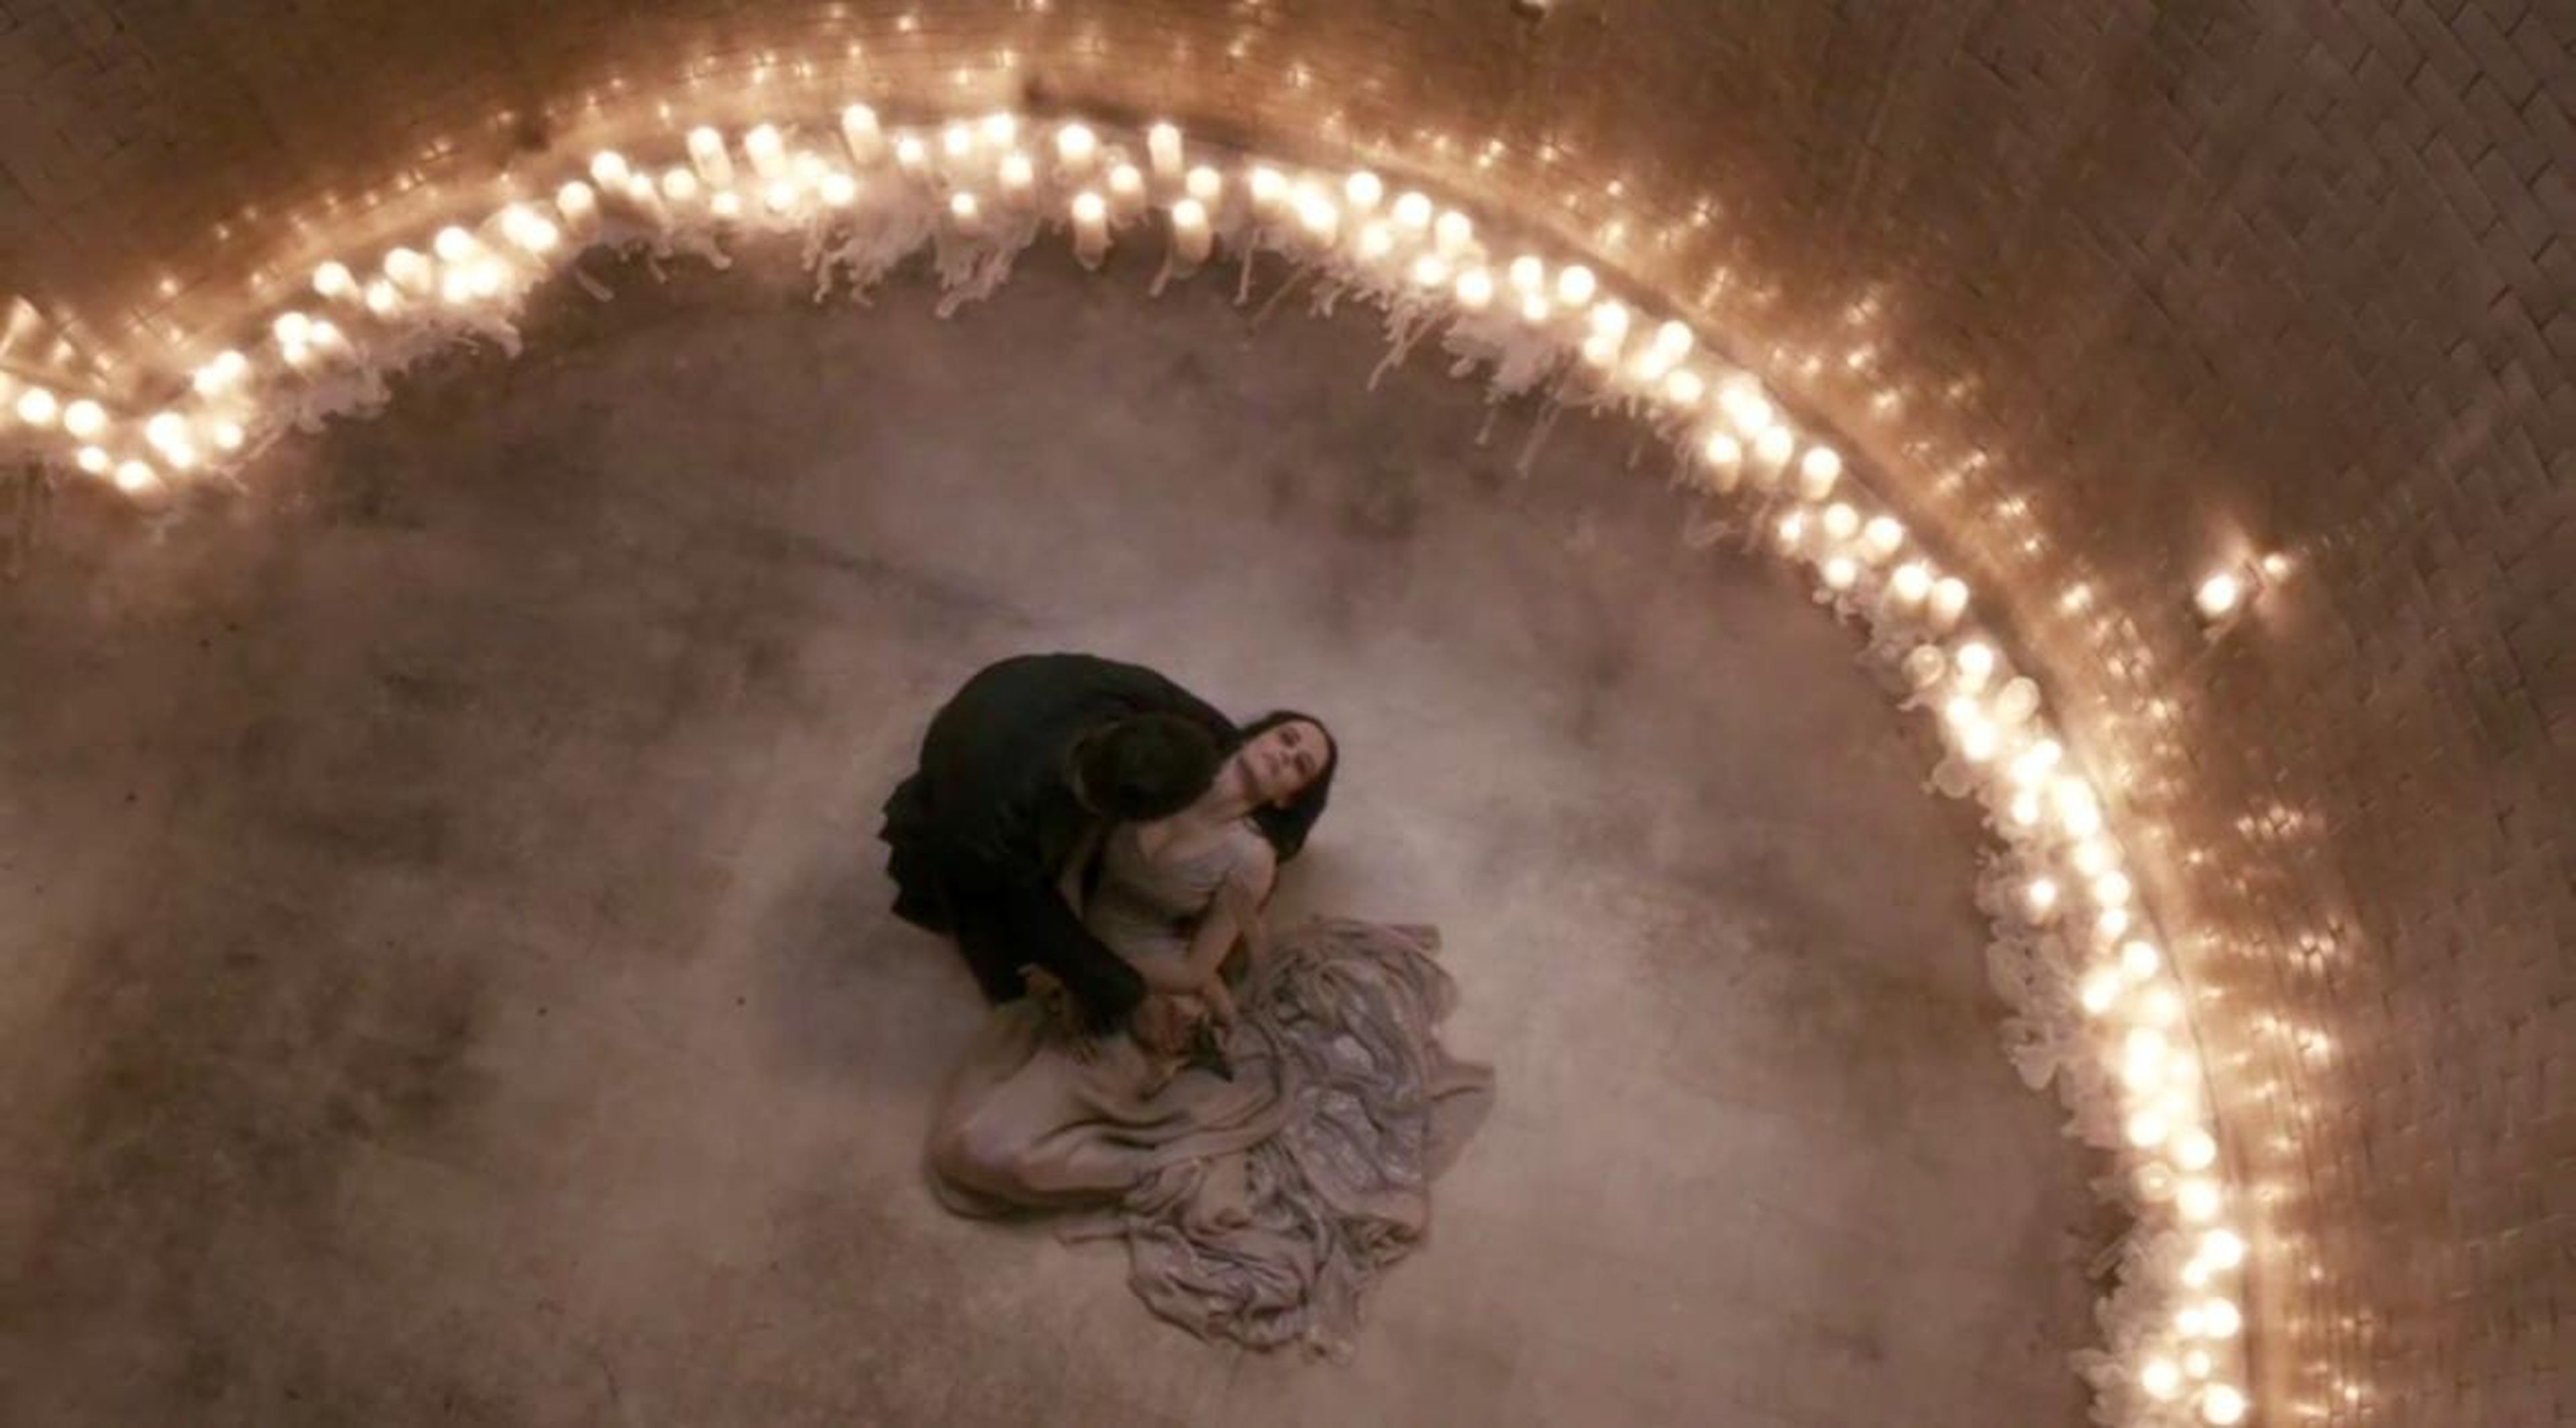 "Penny Dreadful" — season 3 episode 9, "The Blessed Dark"